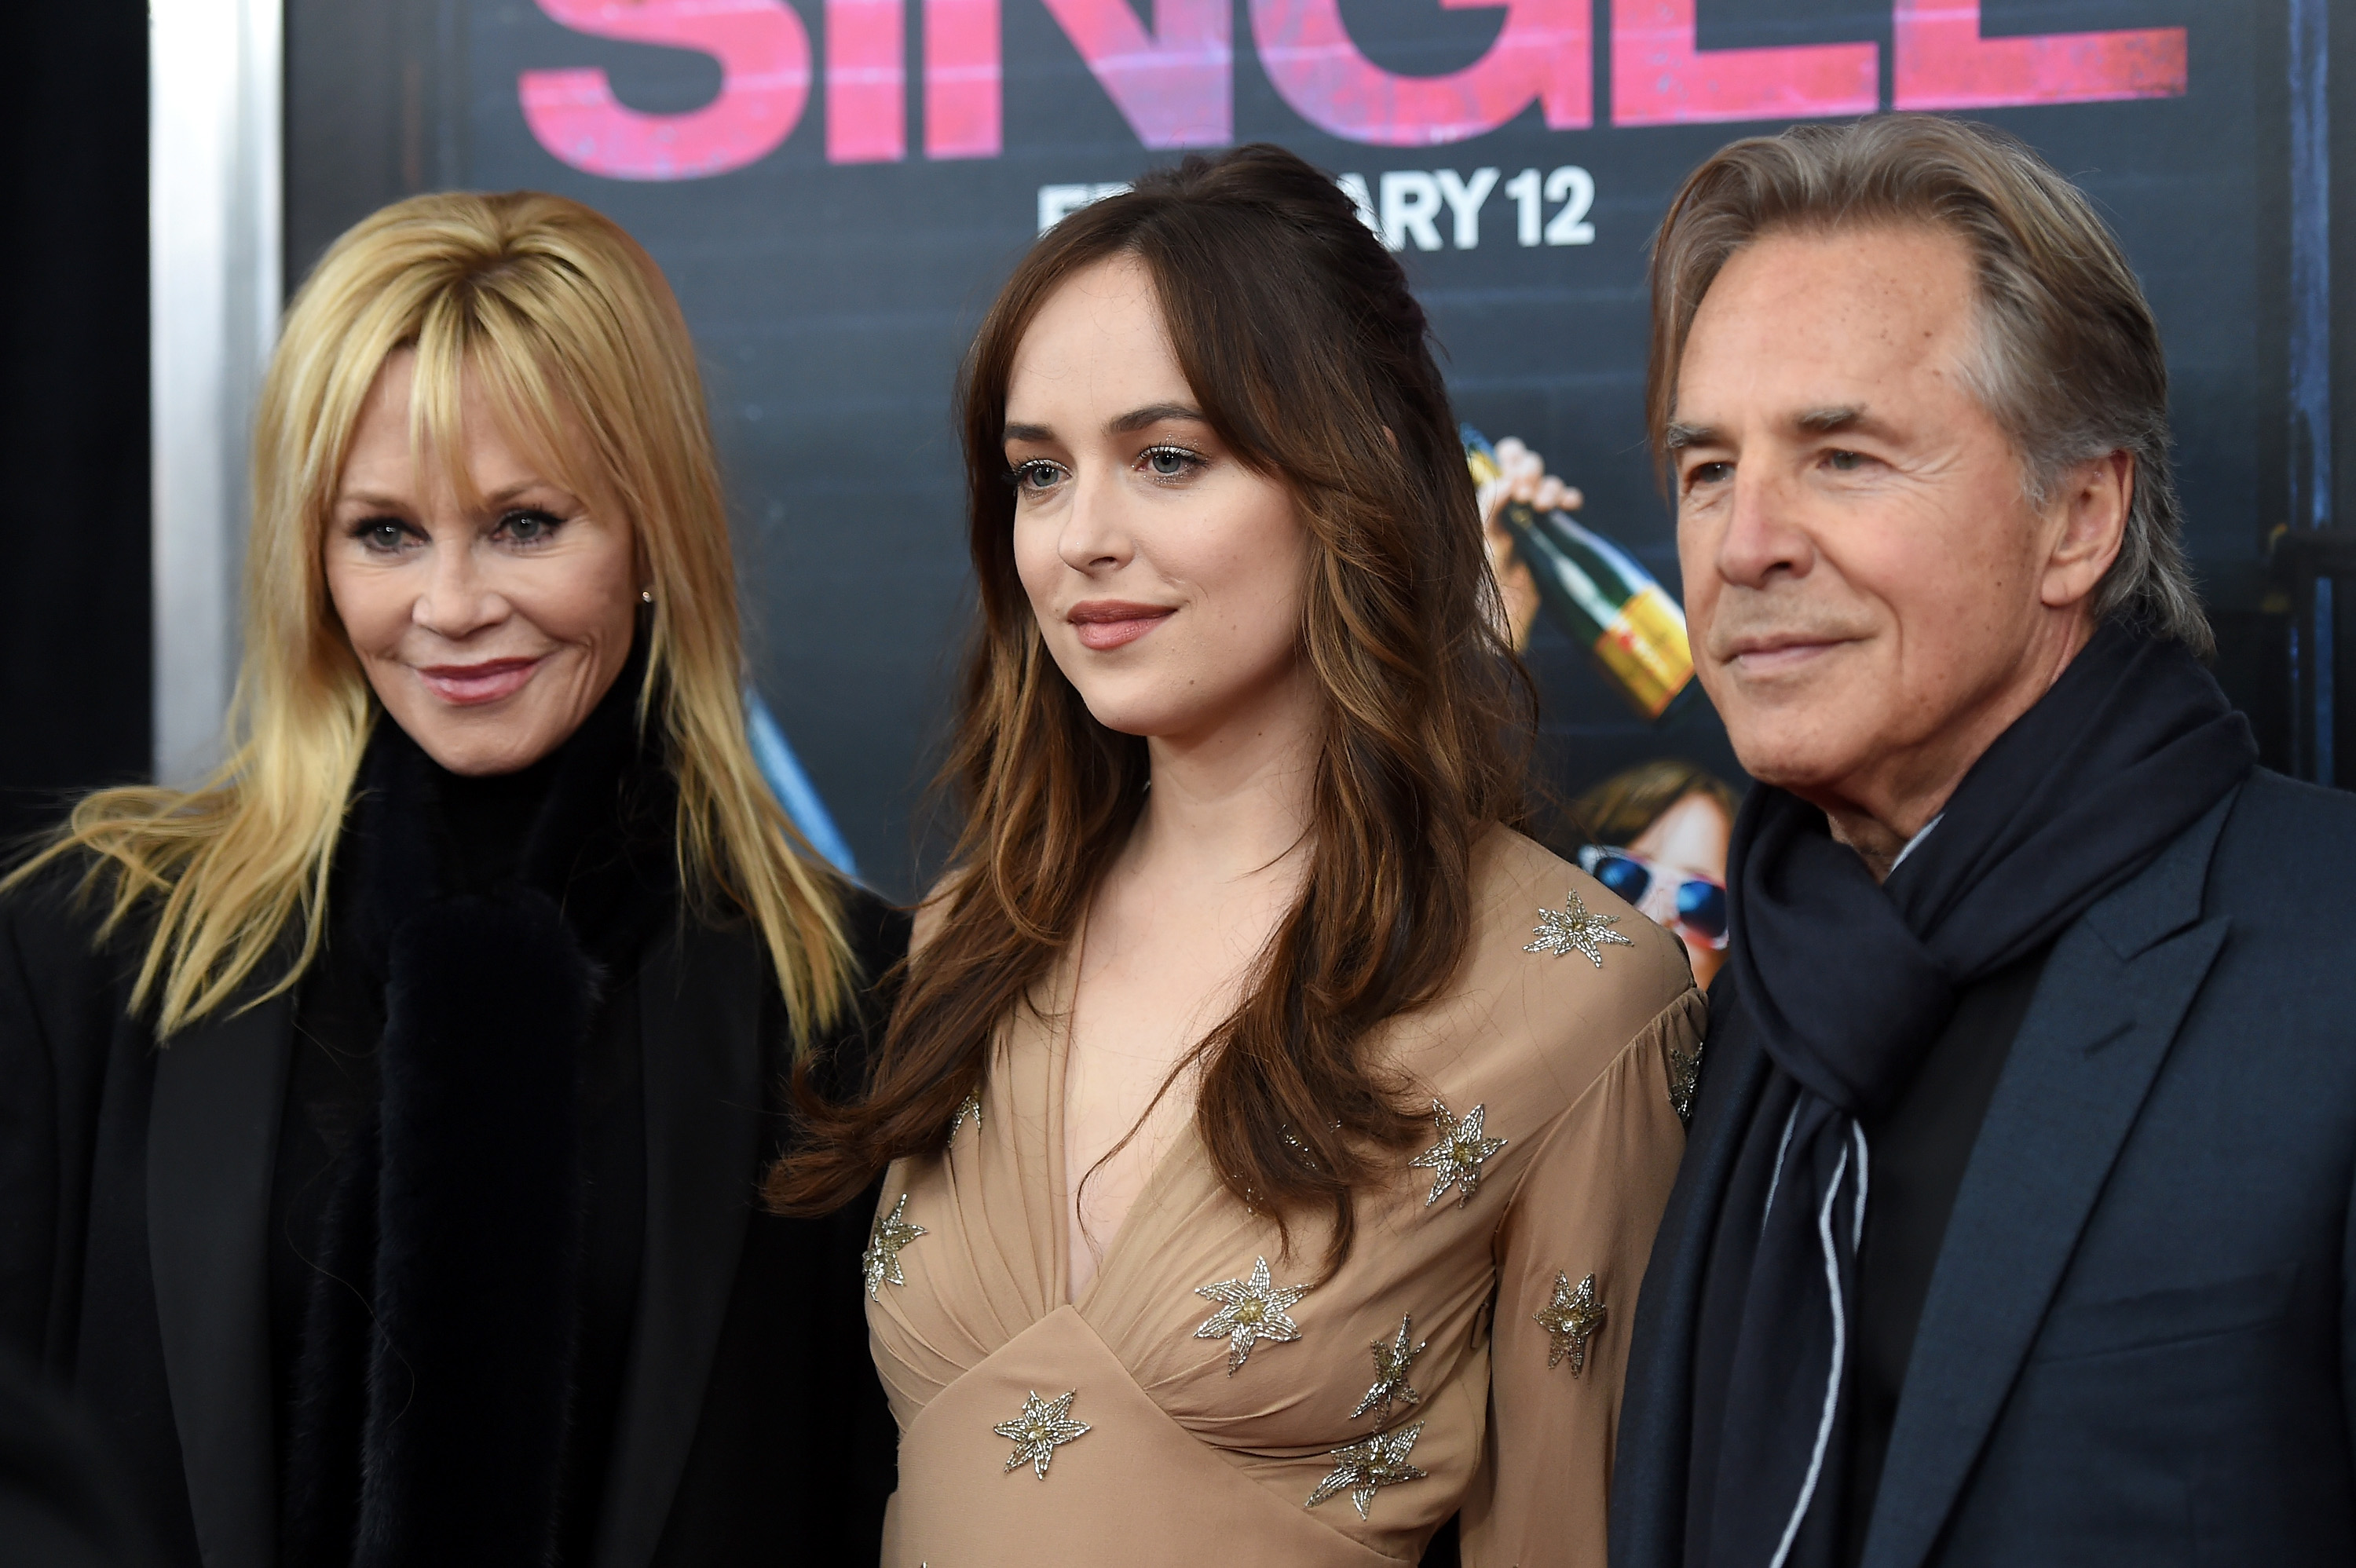 Melanie Griffith, Dakota and Don Johnson at the premiere of "How To Be Single" in New York City on February 3, 2016 | Source: Getty Images